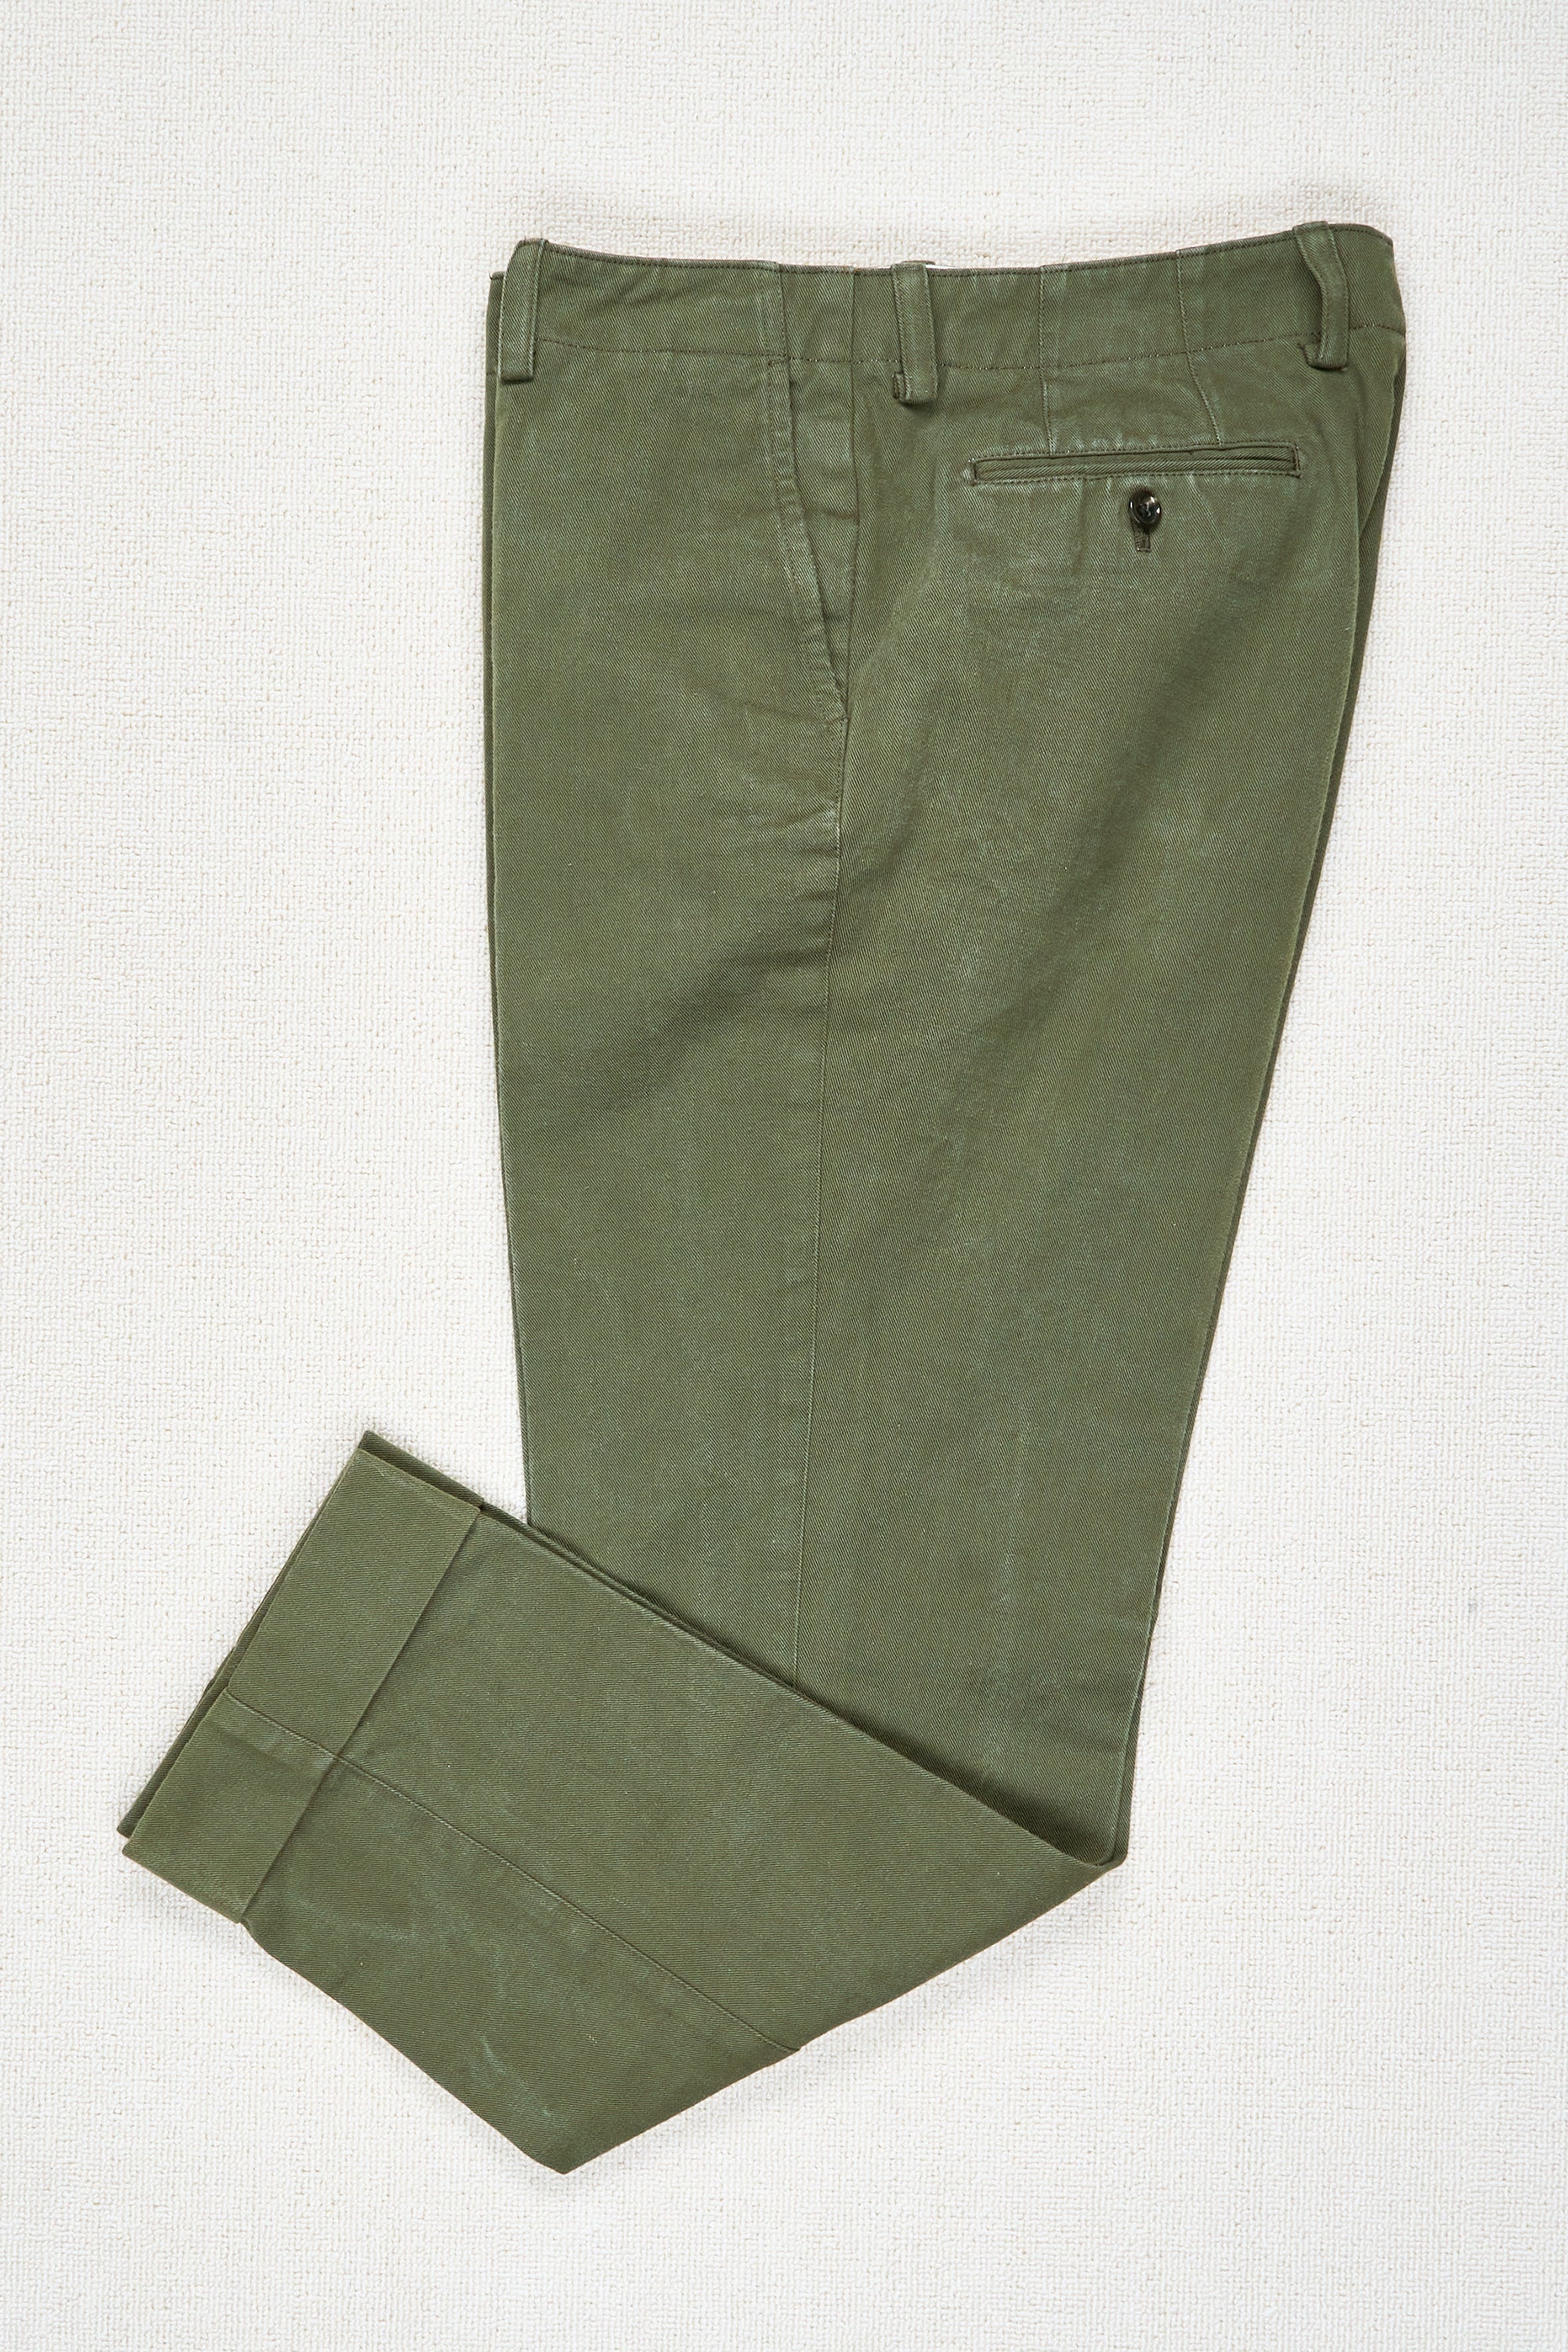 The Armoury by Ring Jacket Olive Cotton Sport Chinos *sample*